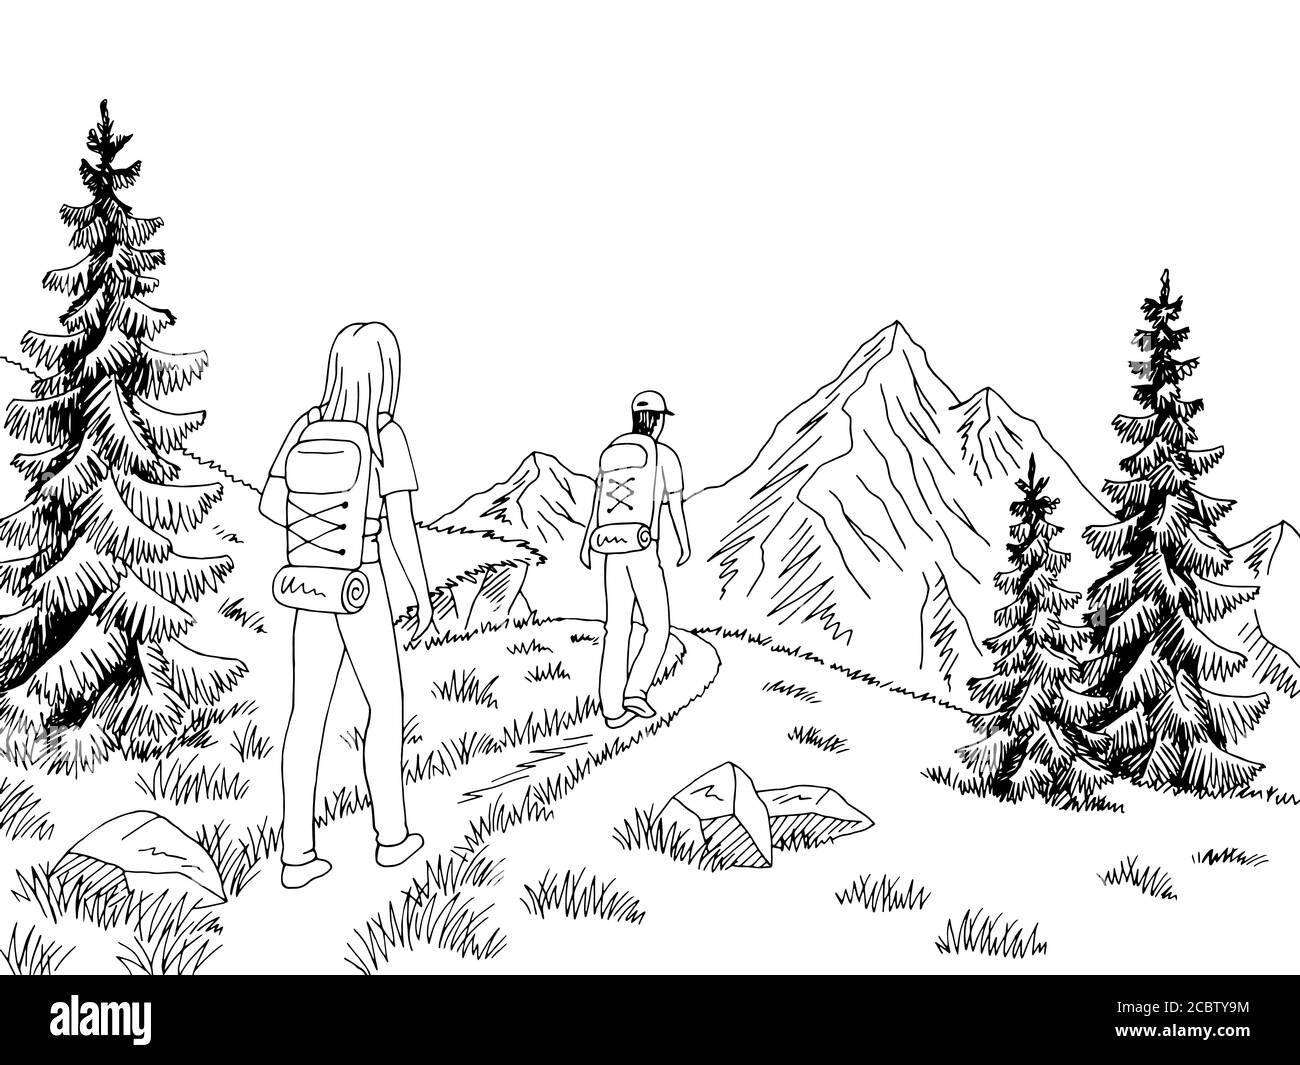 Man and woman tourist walking at the mountains graphic black white landscape sketch illustration vector Stock Vector